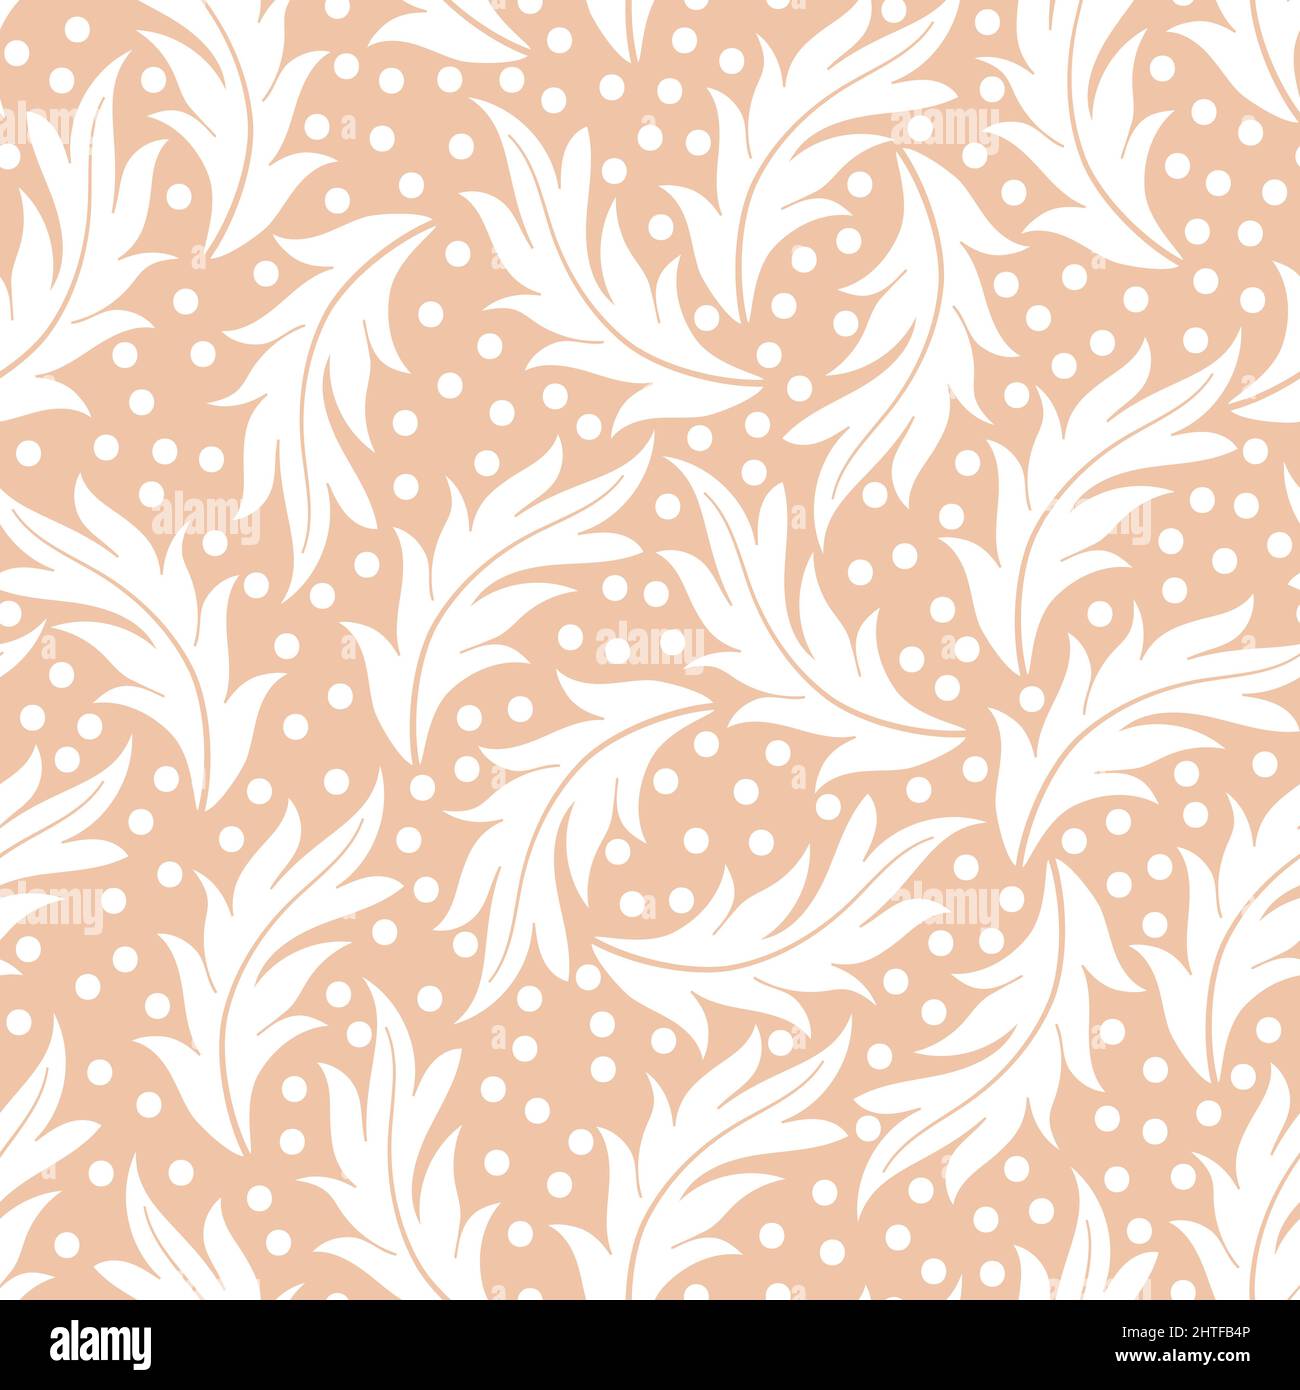 Acanthus leaves seamless pattern design Stock Vector